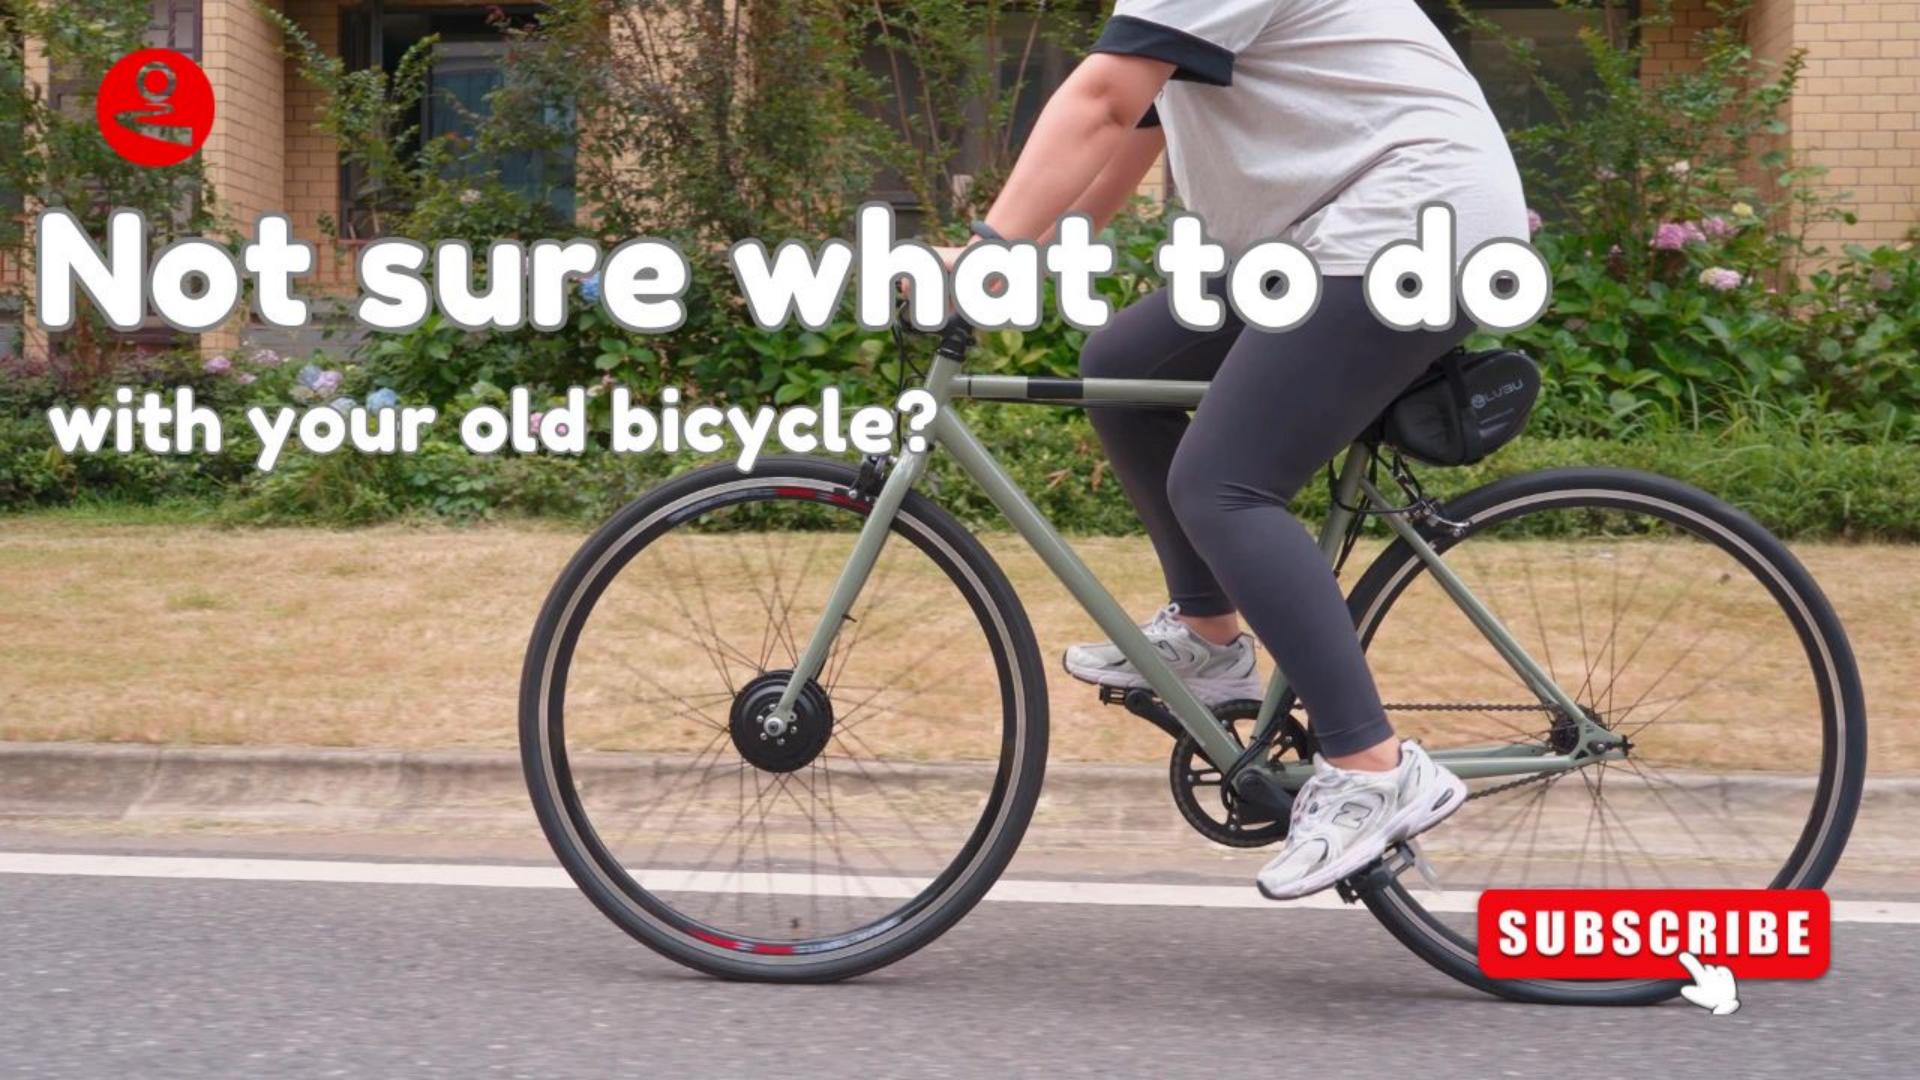 Not sure what to do with your old, worn-out traditional bicycle?